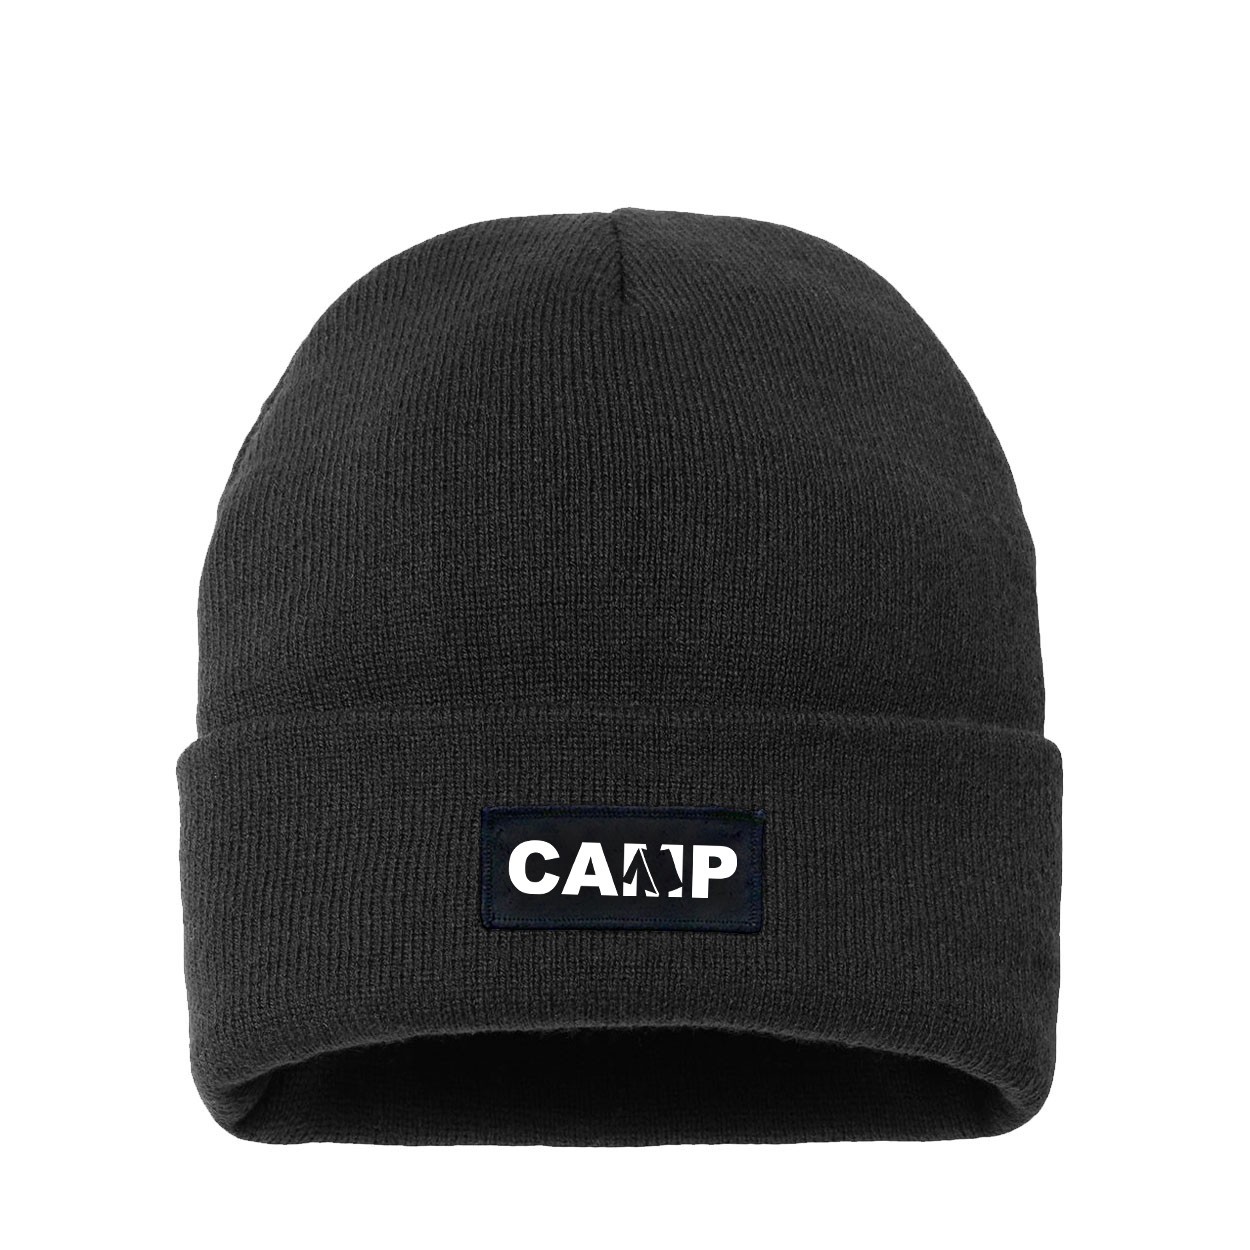 Camp Tent Logo Night Out Woven Patch Night Out Sherpa Lined Cuffed Beanie Black (White Logo)